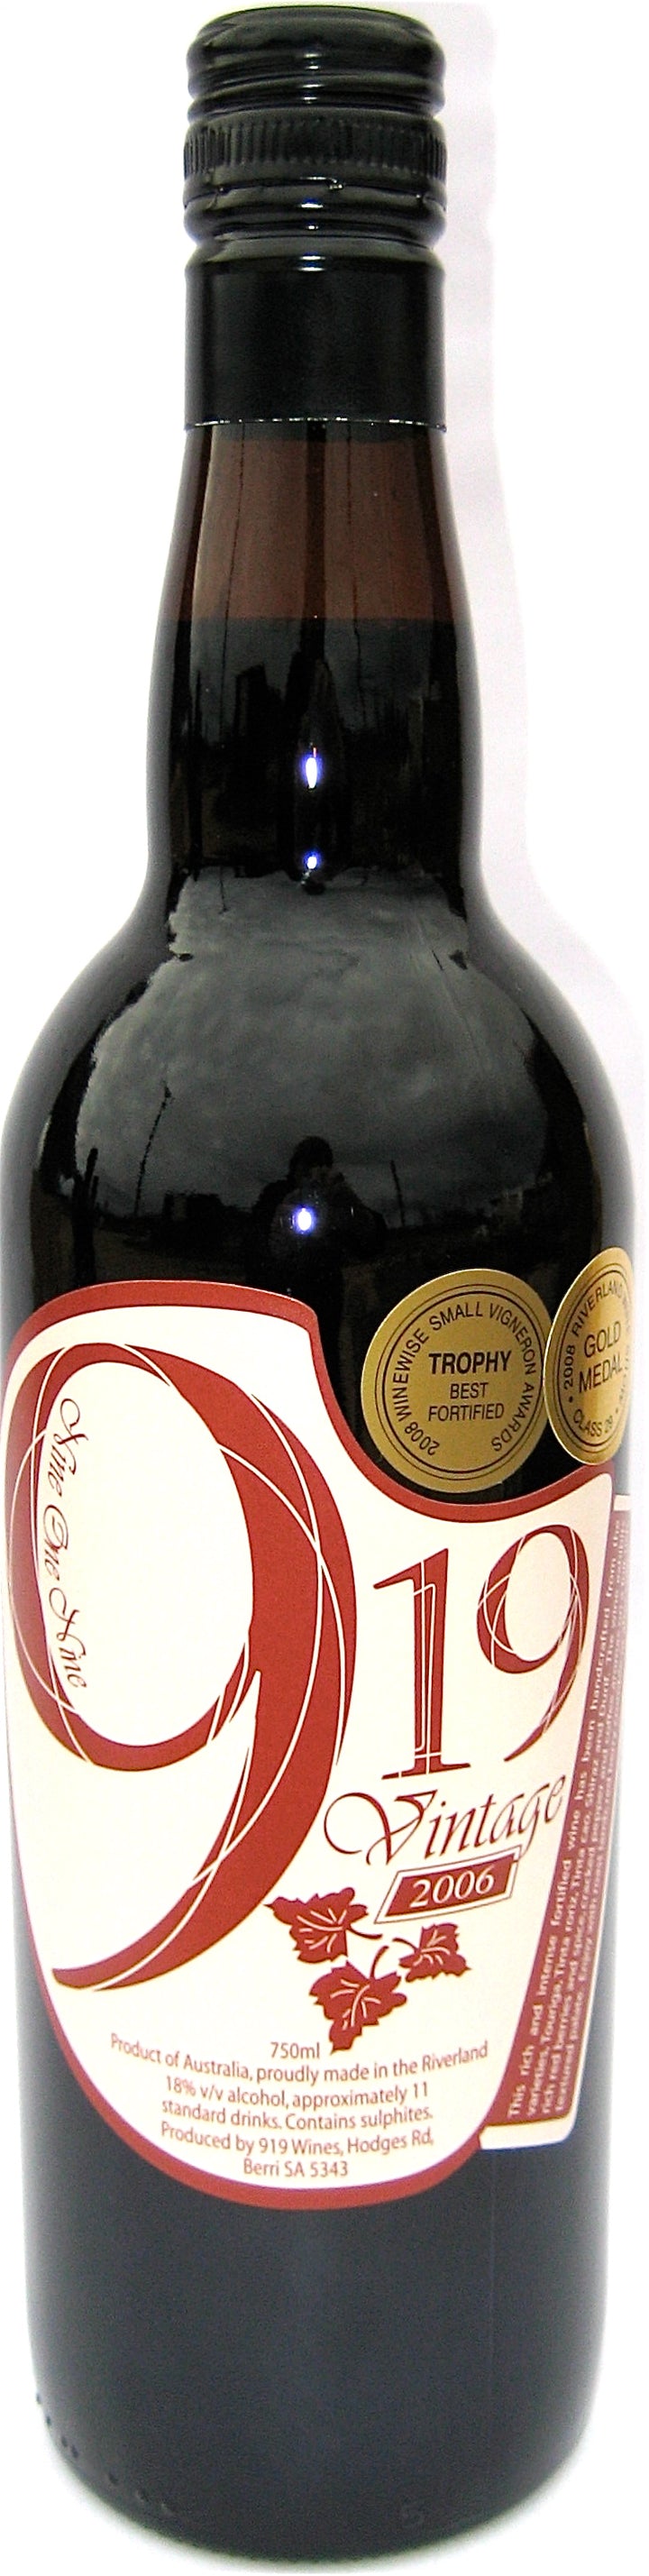 919 Limited Release Vintage Fortified 750mL